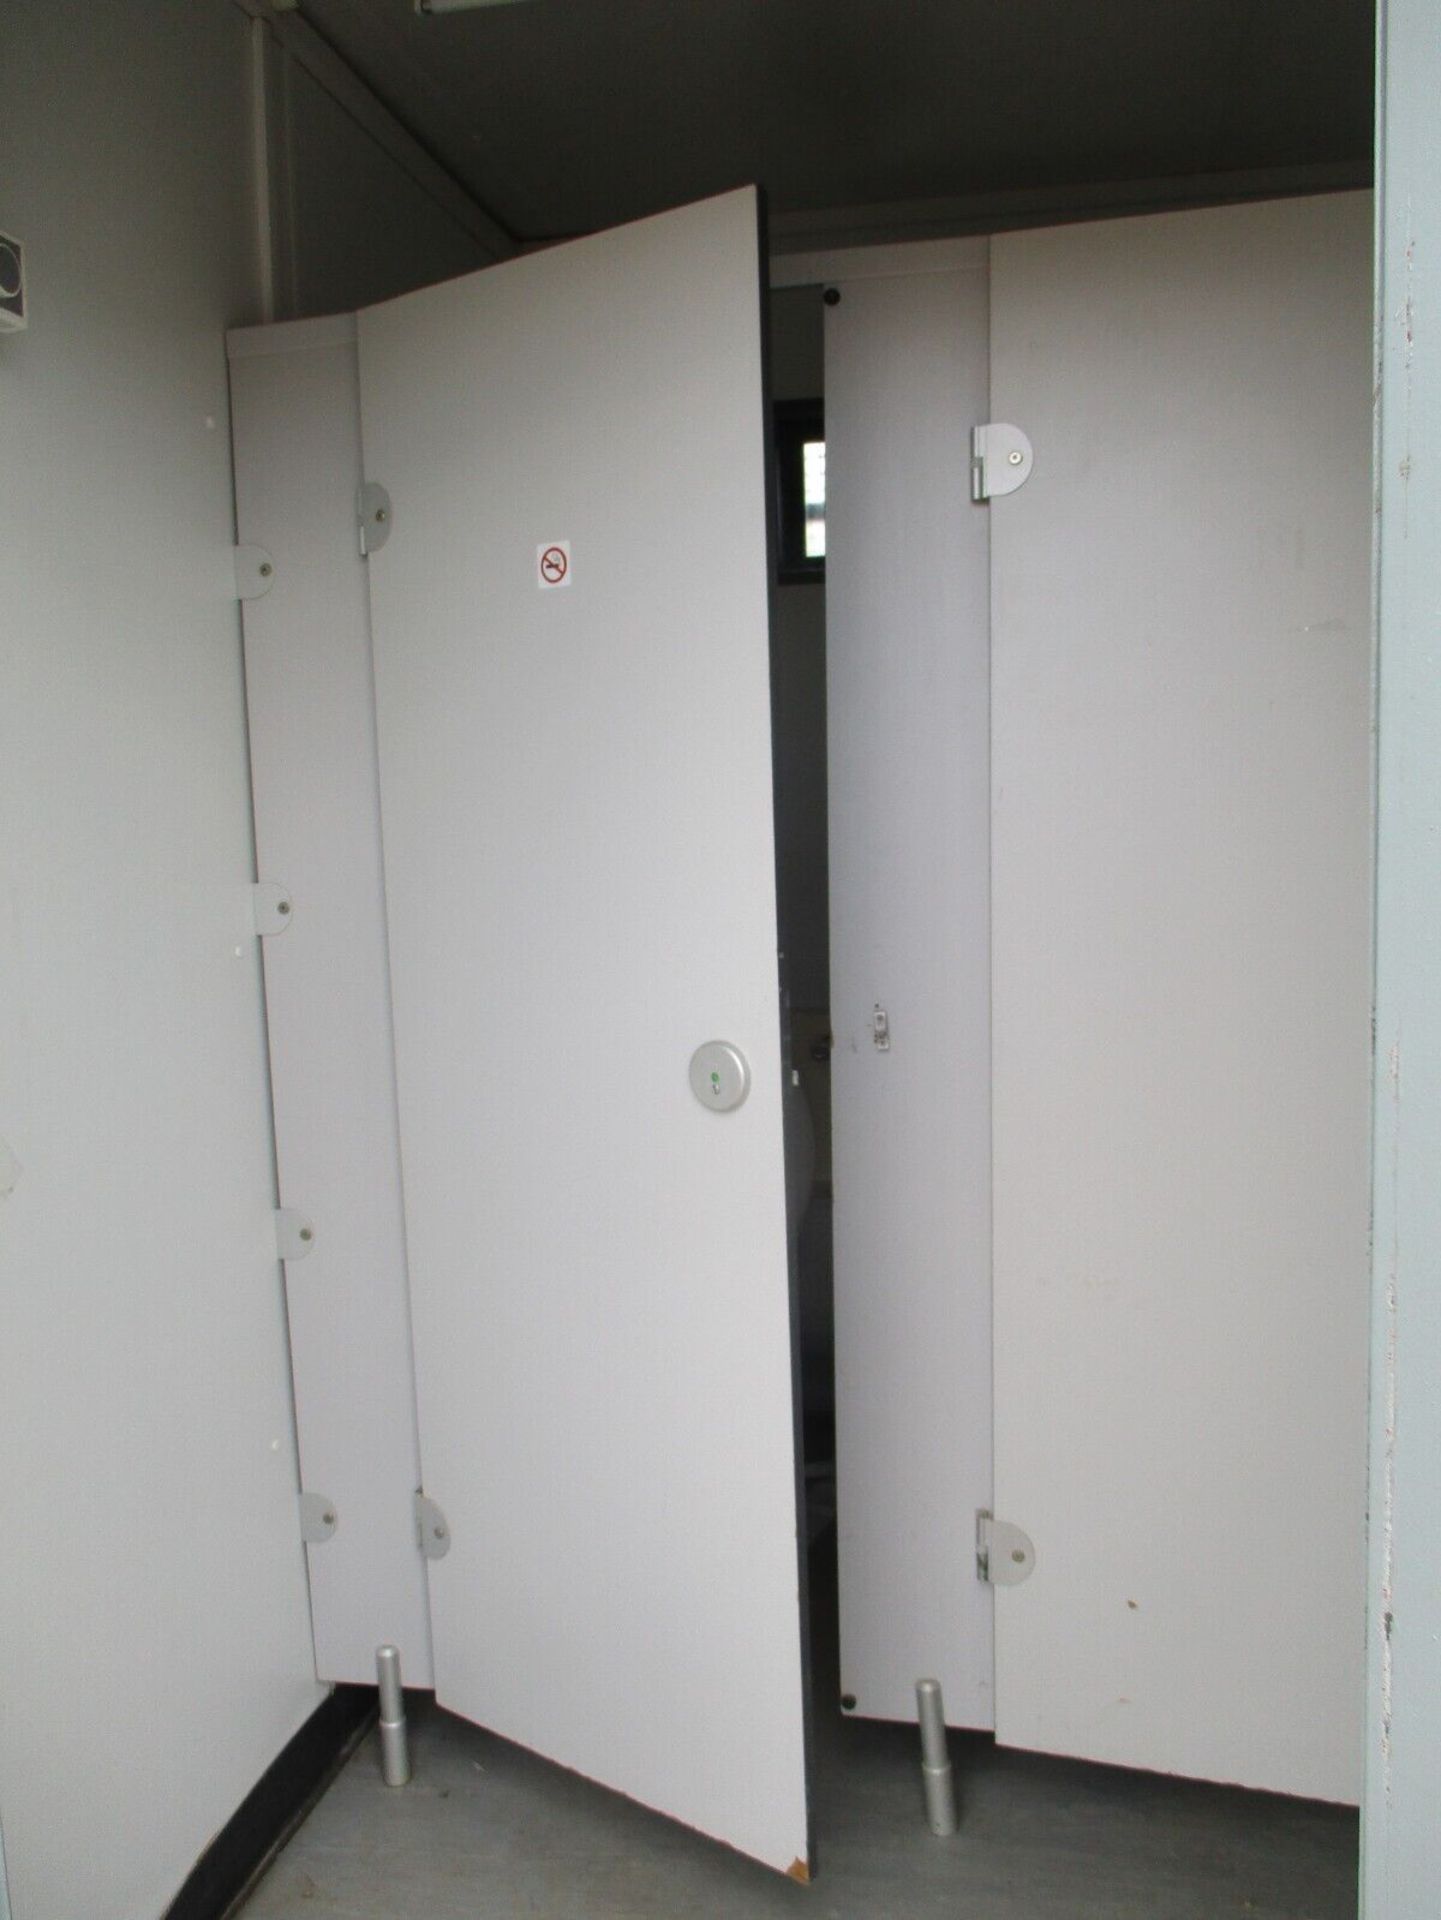 12 FOOT LONG SHIPPING CONTAINER TOILET BLOCK - Image 11 of 12